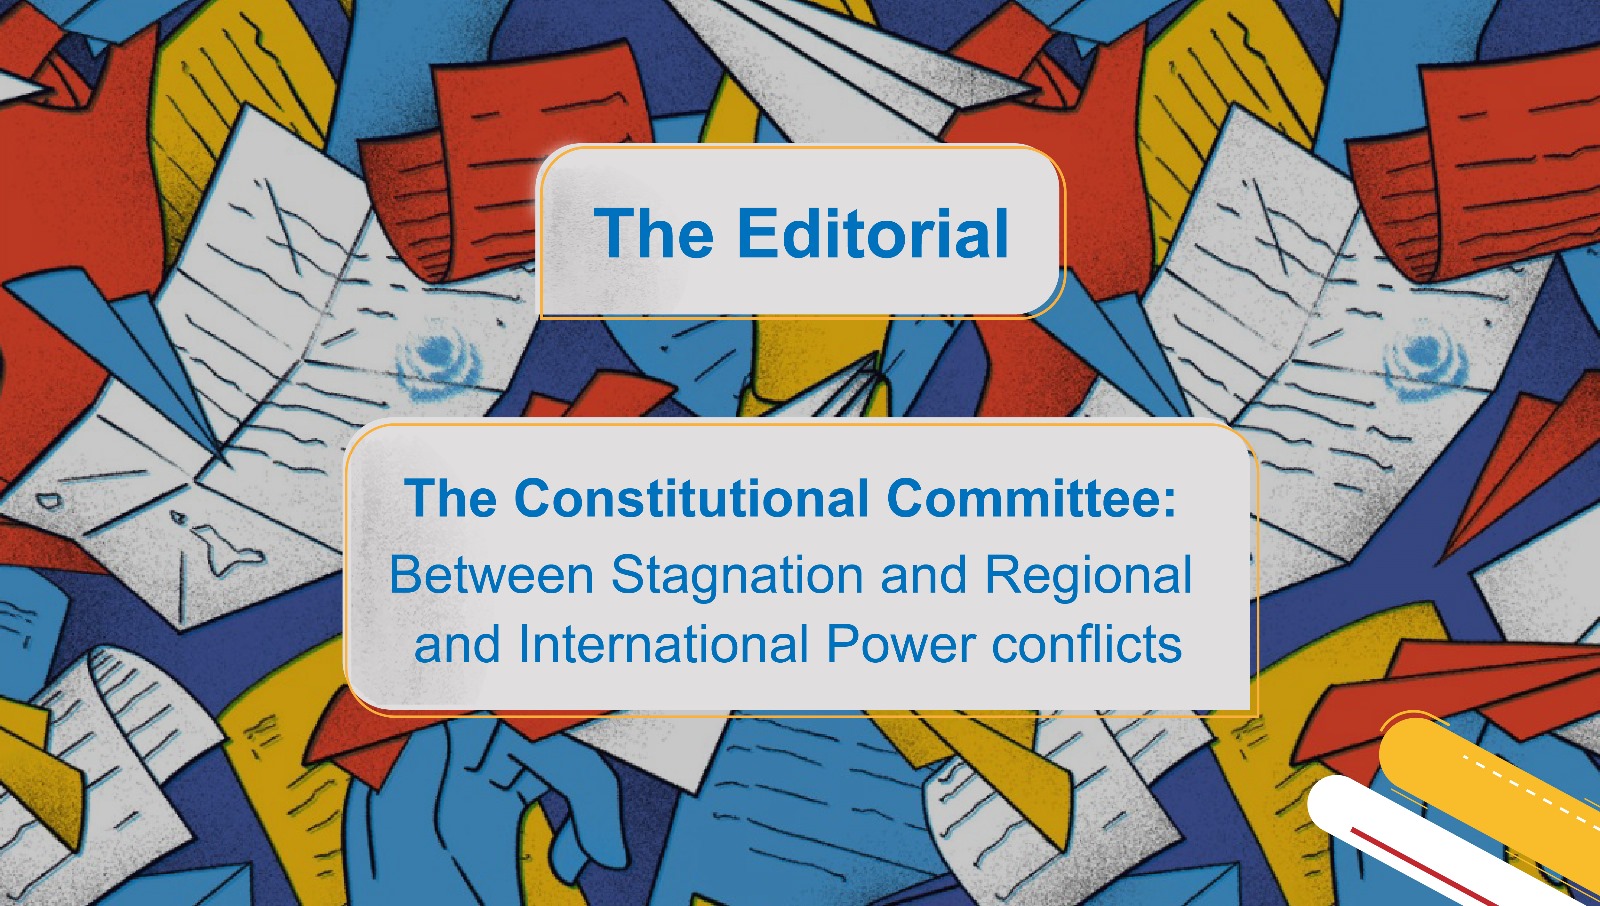 The Constitutional Committee: Between Stagnation and Regional and International Power conflicts